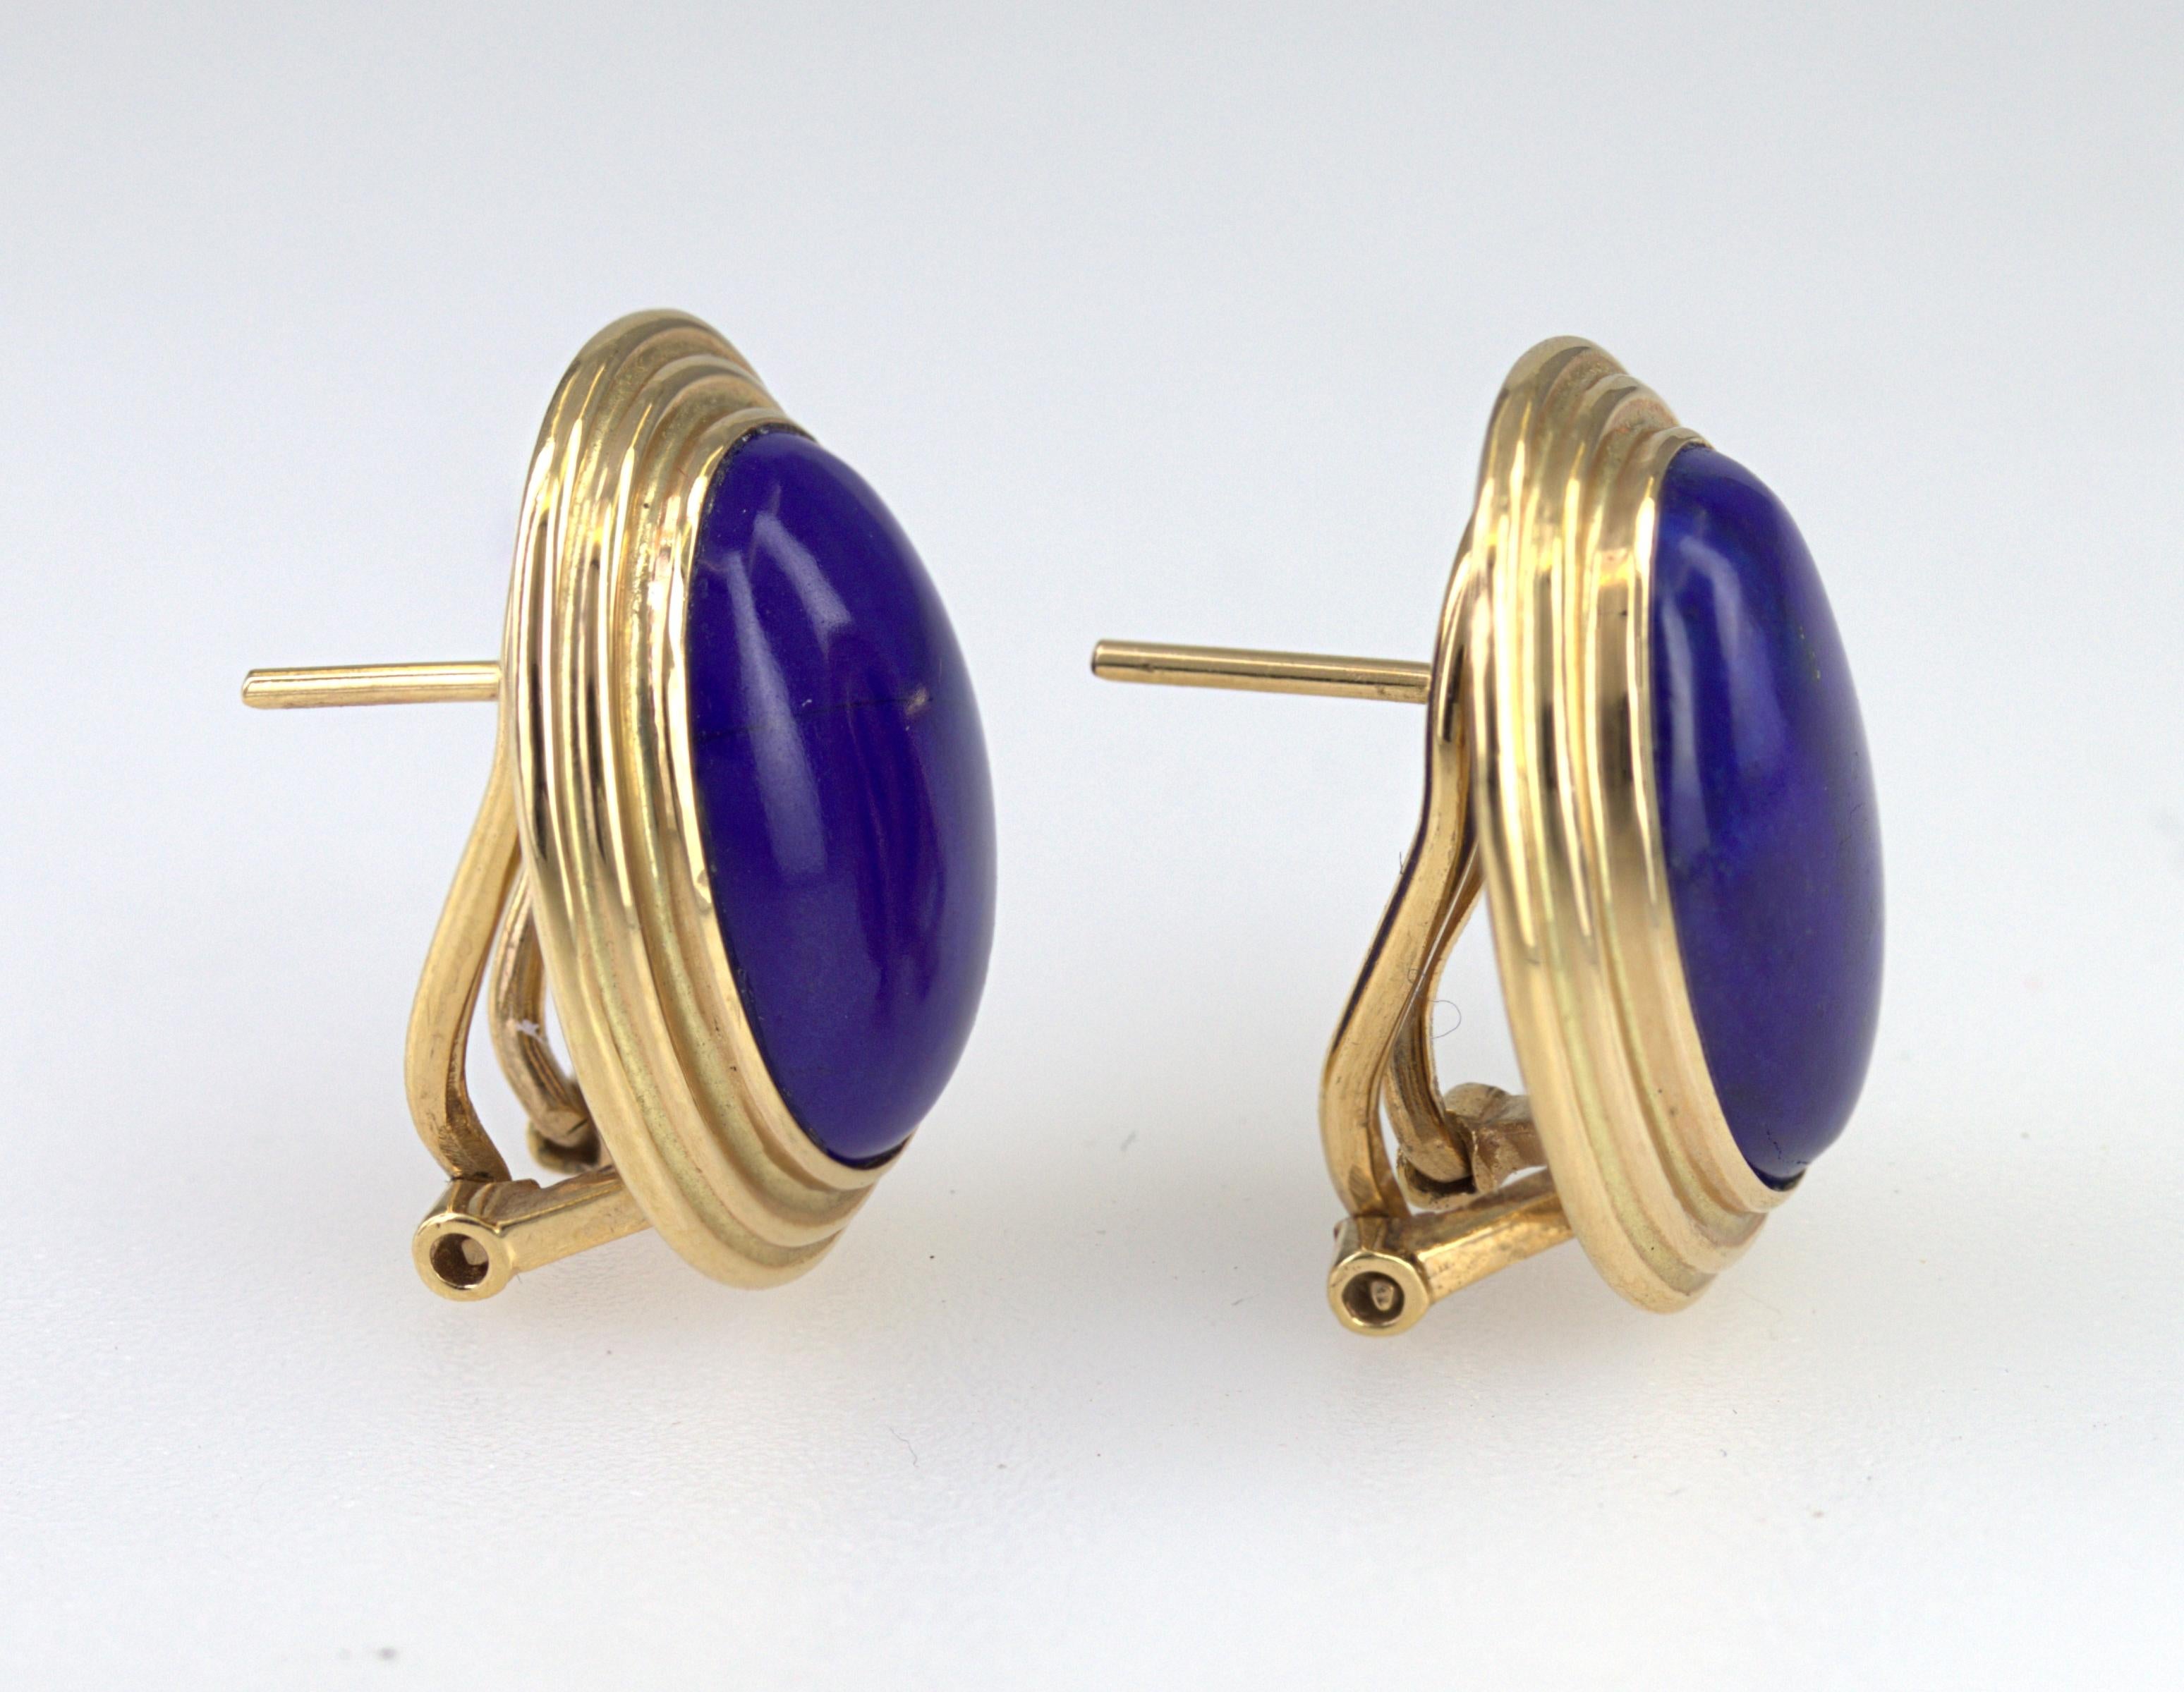 Featuring (2) oval lapis lazuli cabochons, 14 X 9 mm, bezel set and framed in 14k yellow gold mountings, 18 X 14 mm, completed with post and omega back, Gross weight 6.60 grams.